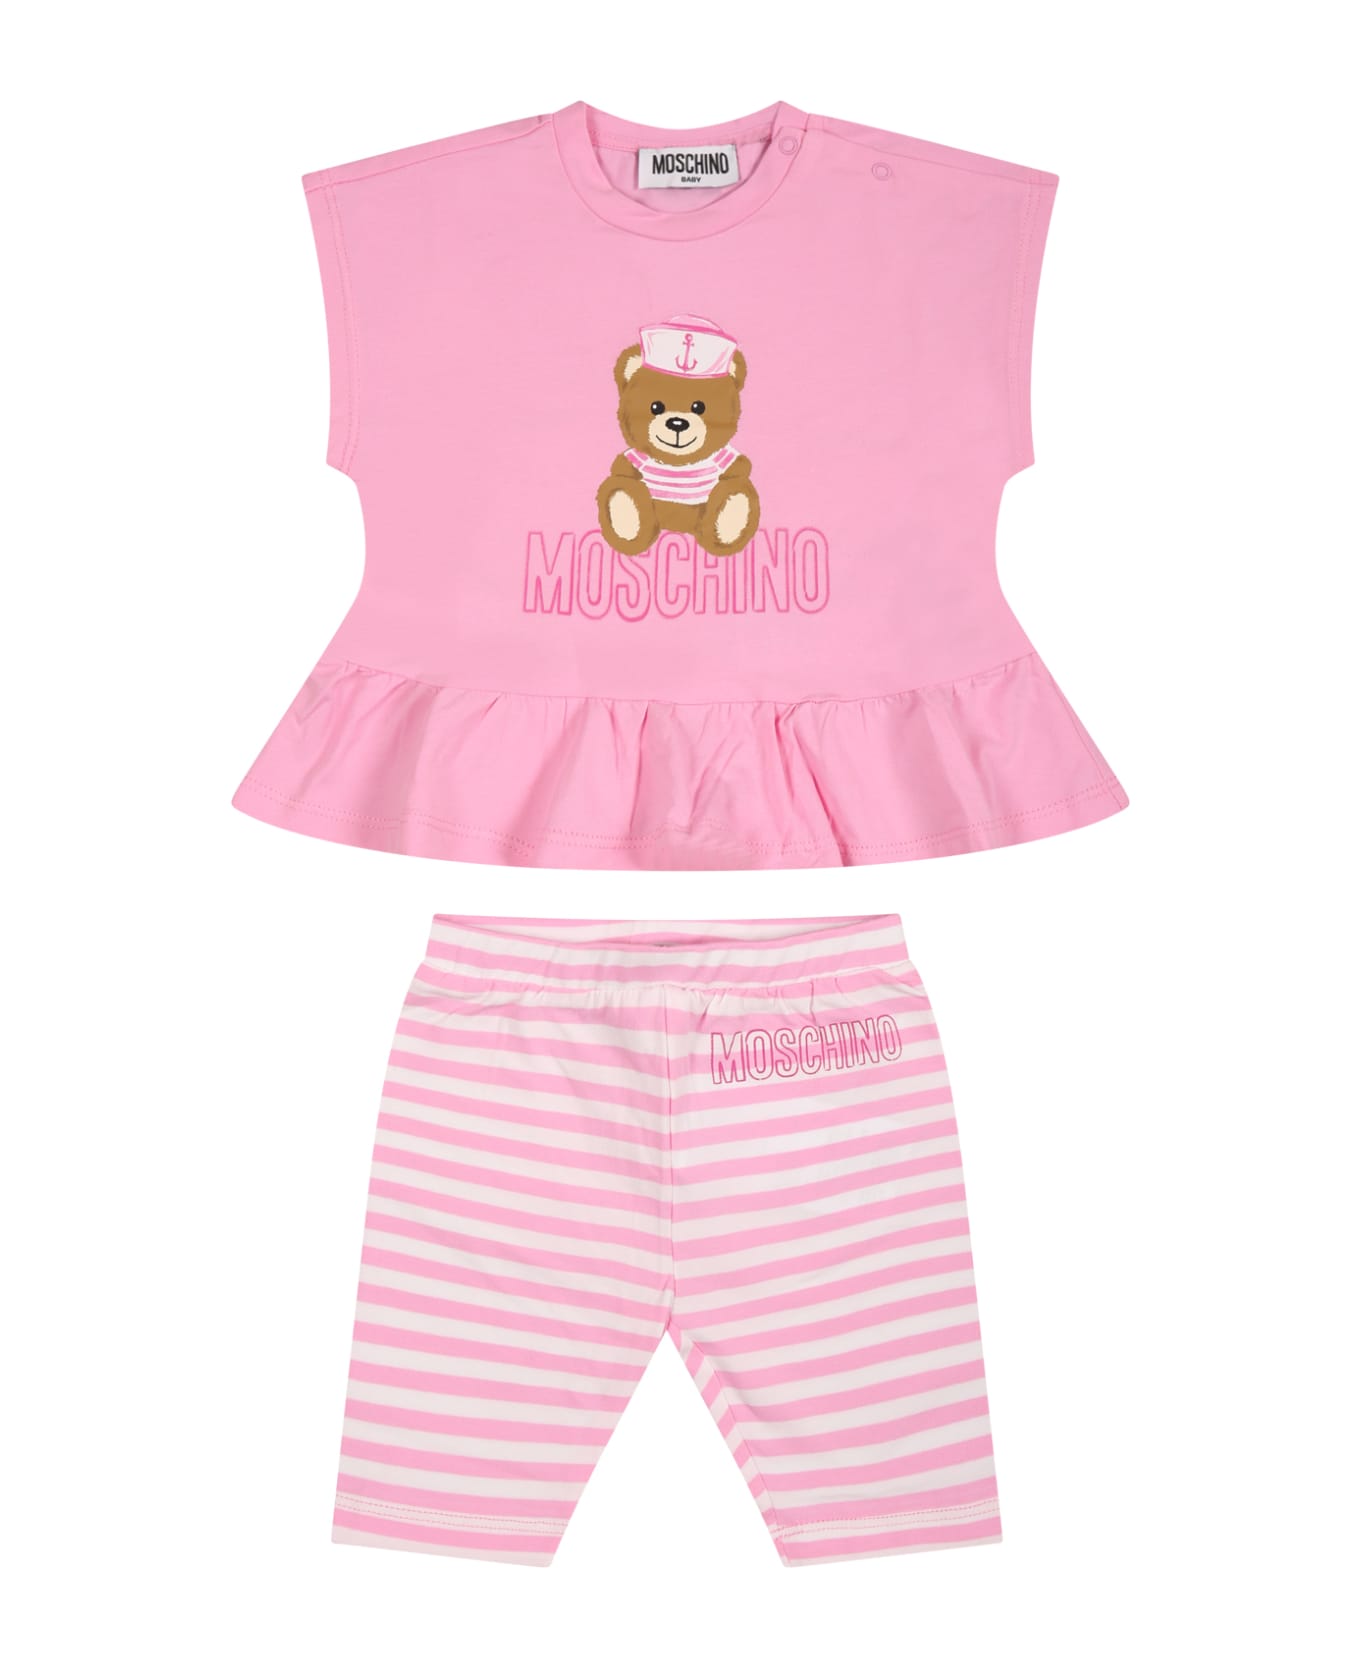 Moschino Pink Suit For Baby Girl With Teddy Bear And Logo - Pink ボトムス